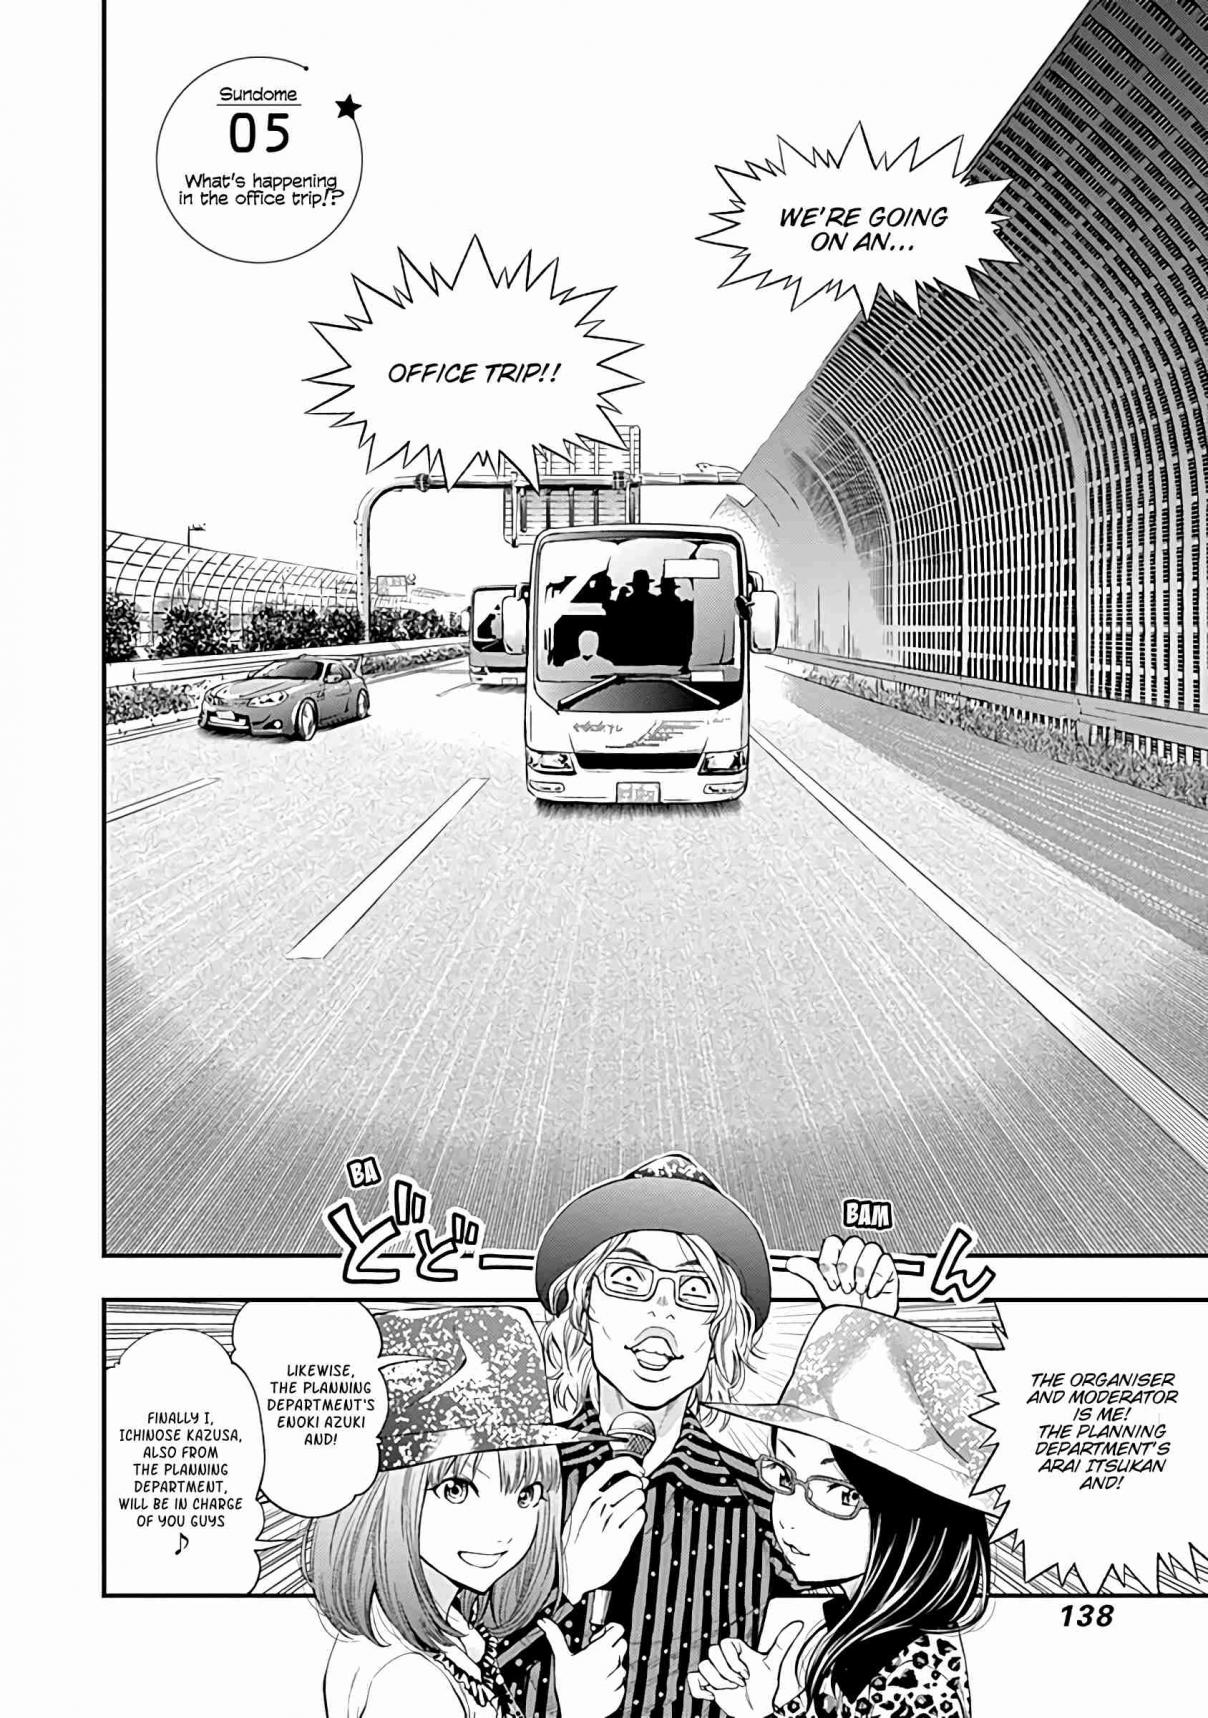 Sundome!! Milky Way Vol. 1 Ch. 5 What's happening in the office trip!?